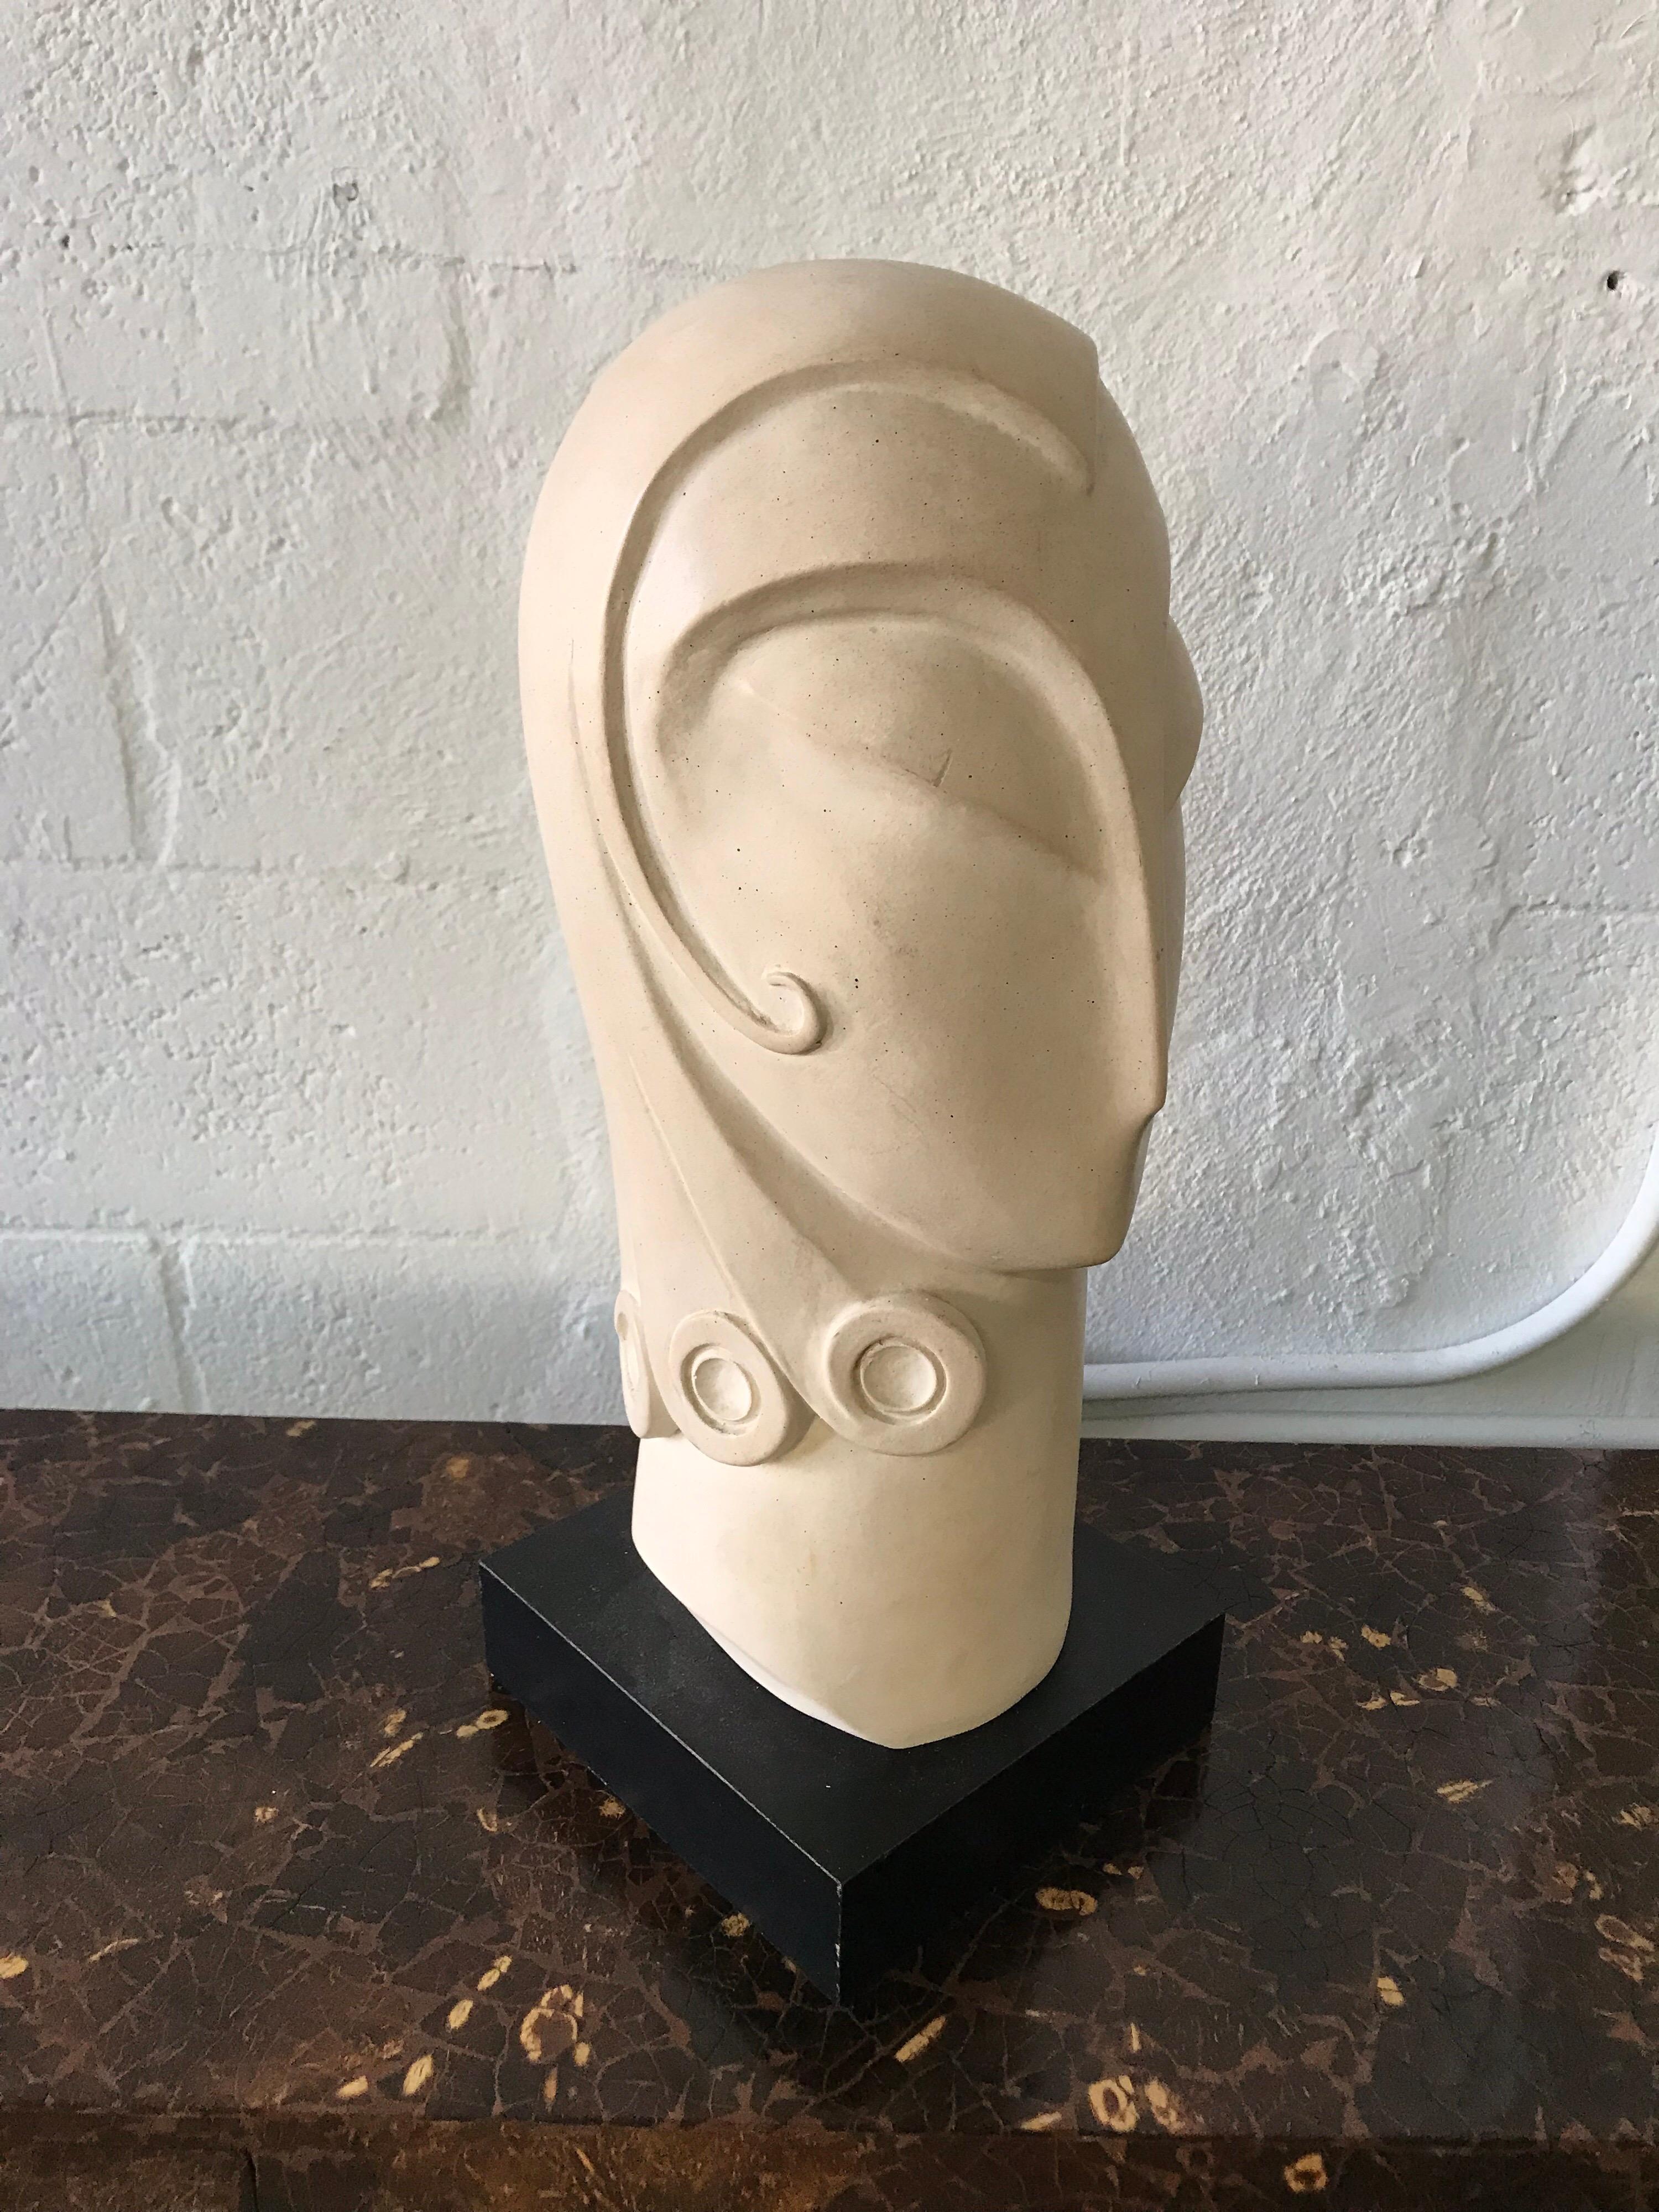 Postmodern plaster resin head bust sculpture in the style of Brancusi by Austin Productions Signed Fisher, 1995.